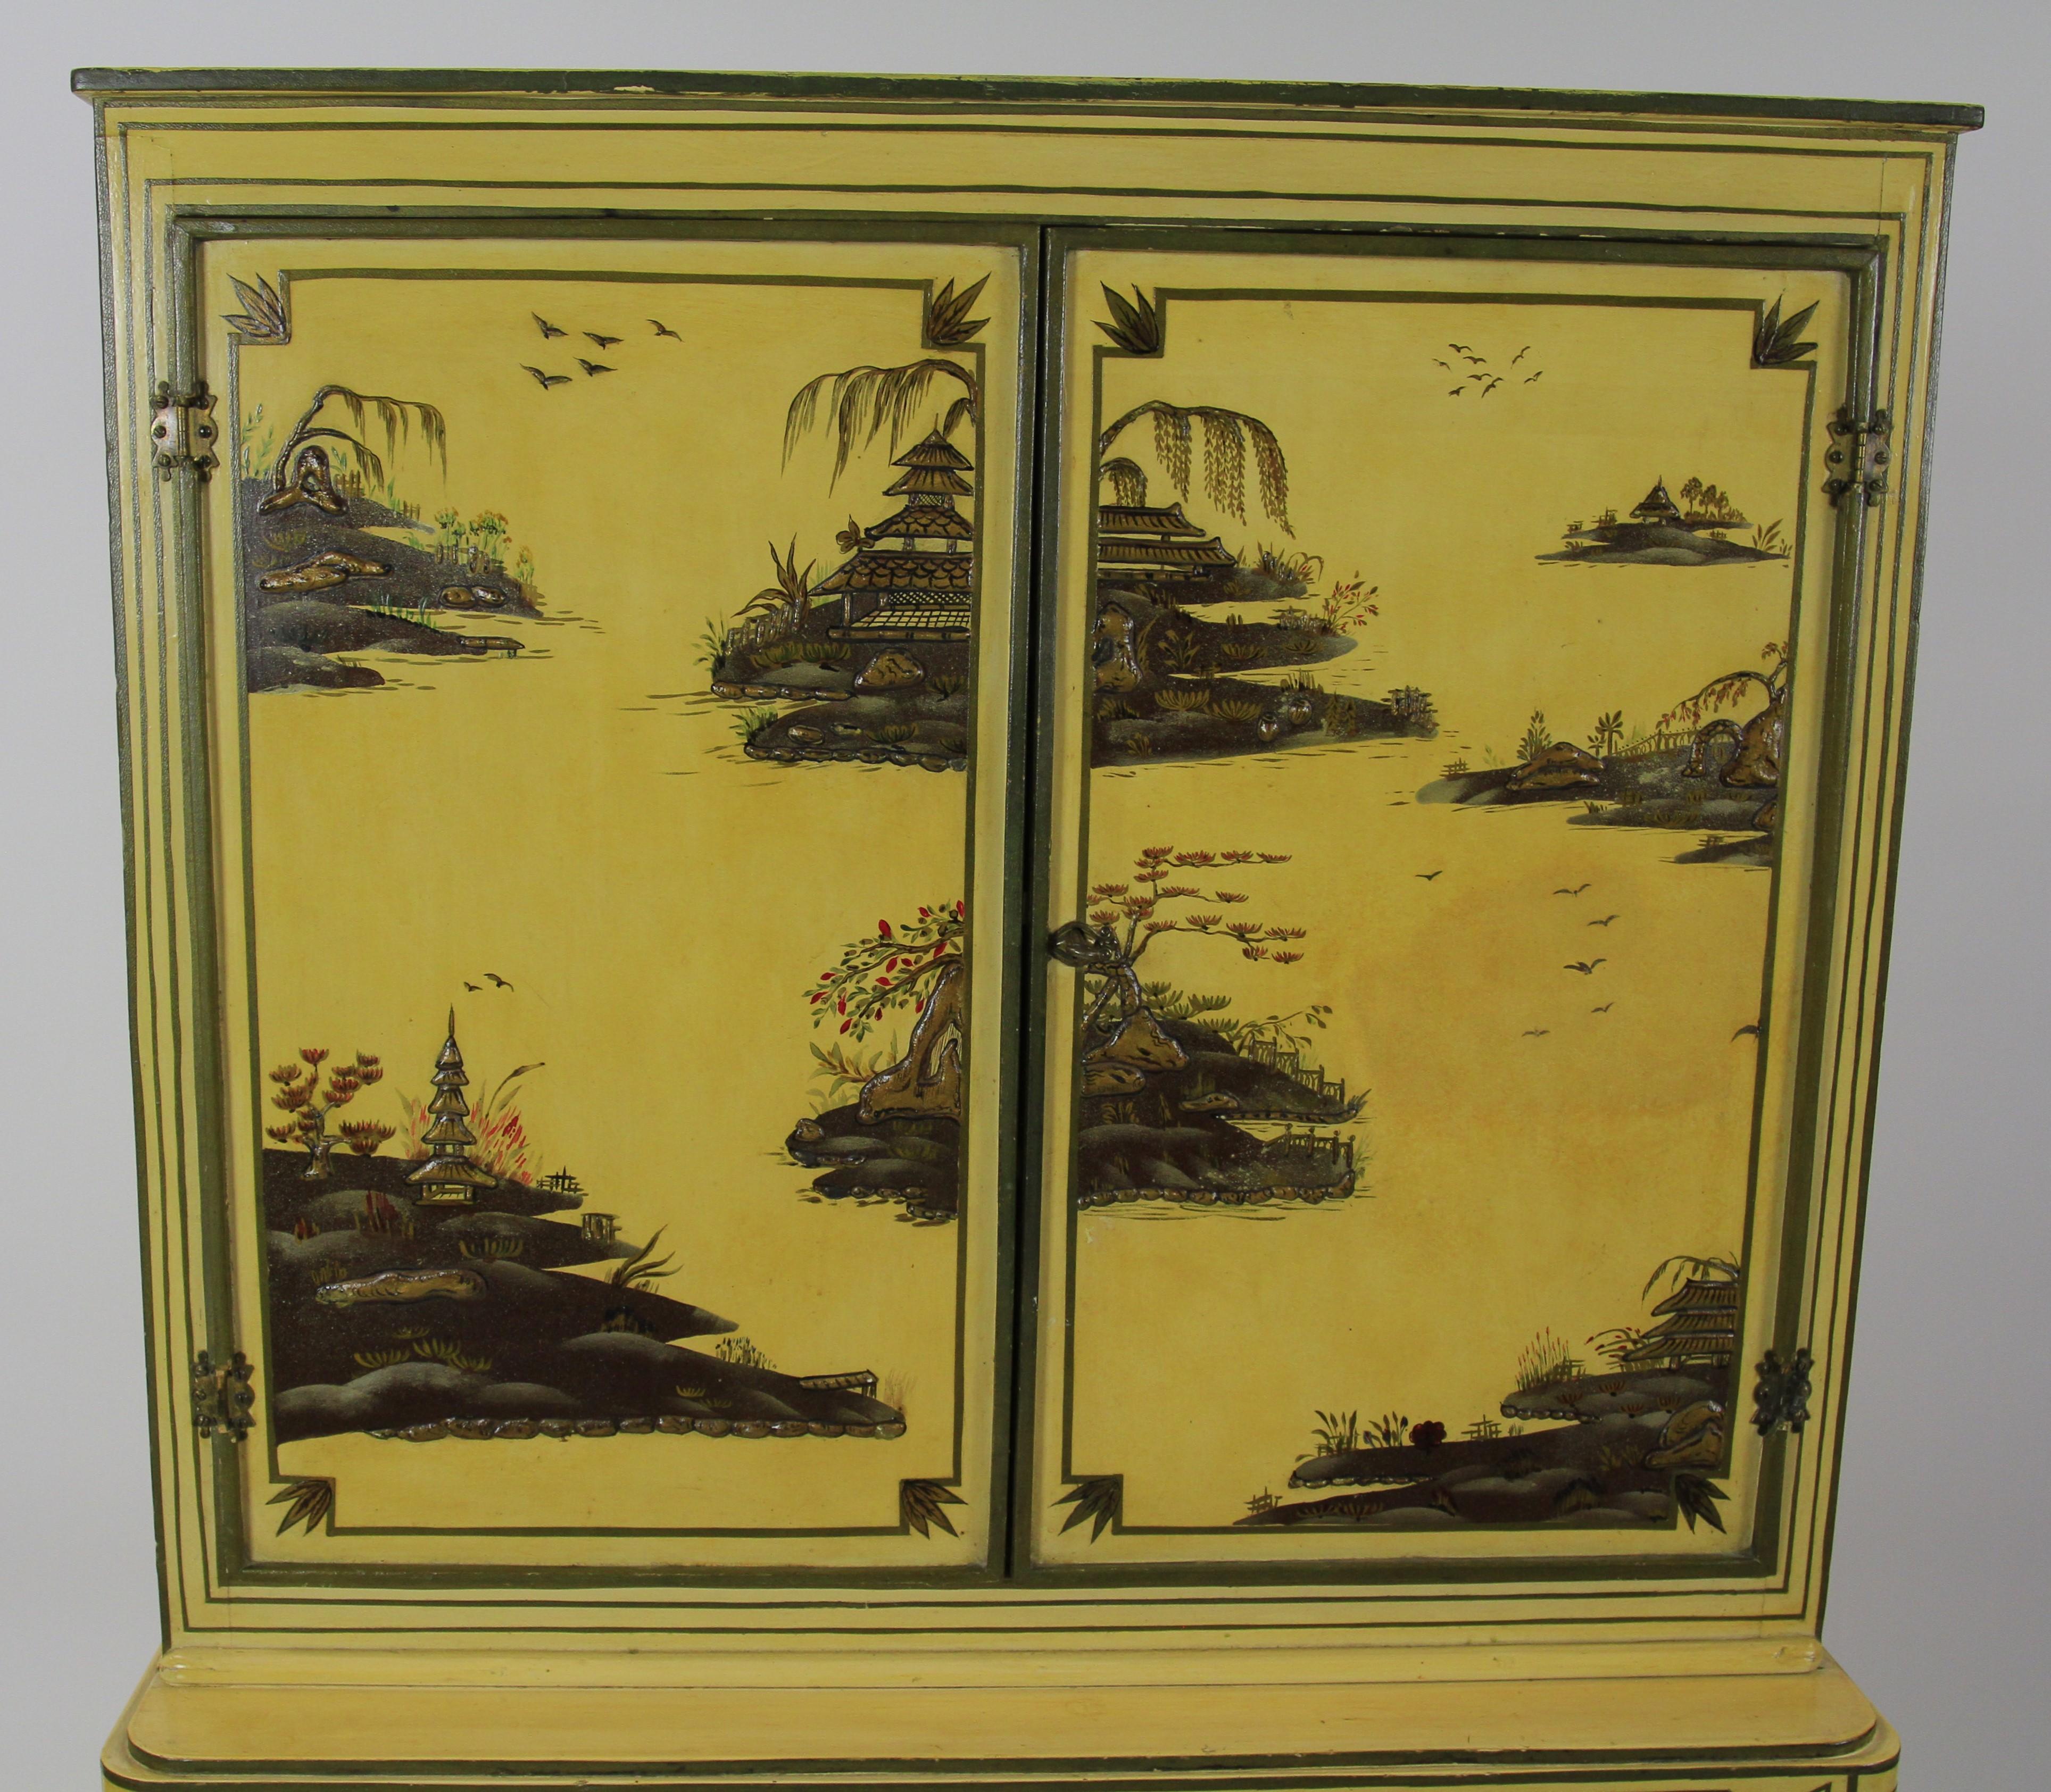 Chinoiserie Decorated 4 door cupboard circa 1900
Cream In colour 
4 doors with gilt frames,
Working locks with key, open to Reveal:
Shelf interior
Gilded Line & x pattern detail on front of cupboard
Good original chinoiserie decoration